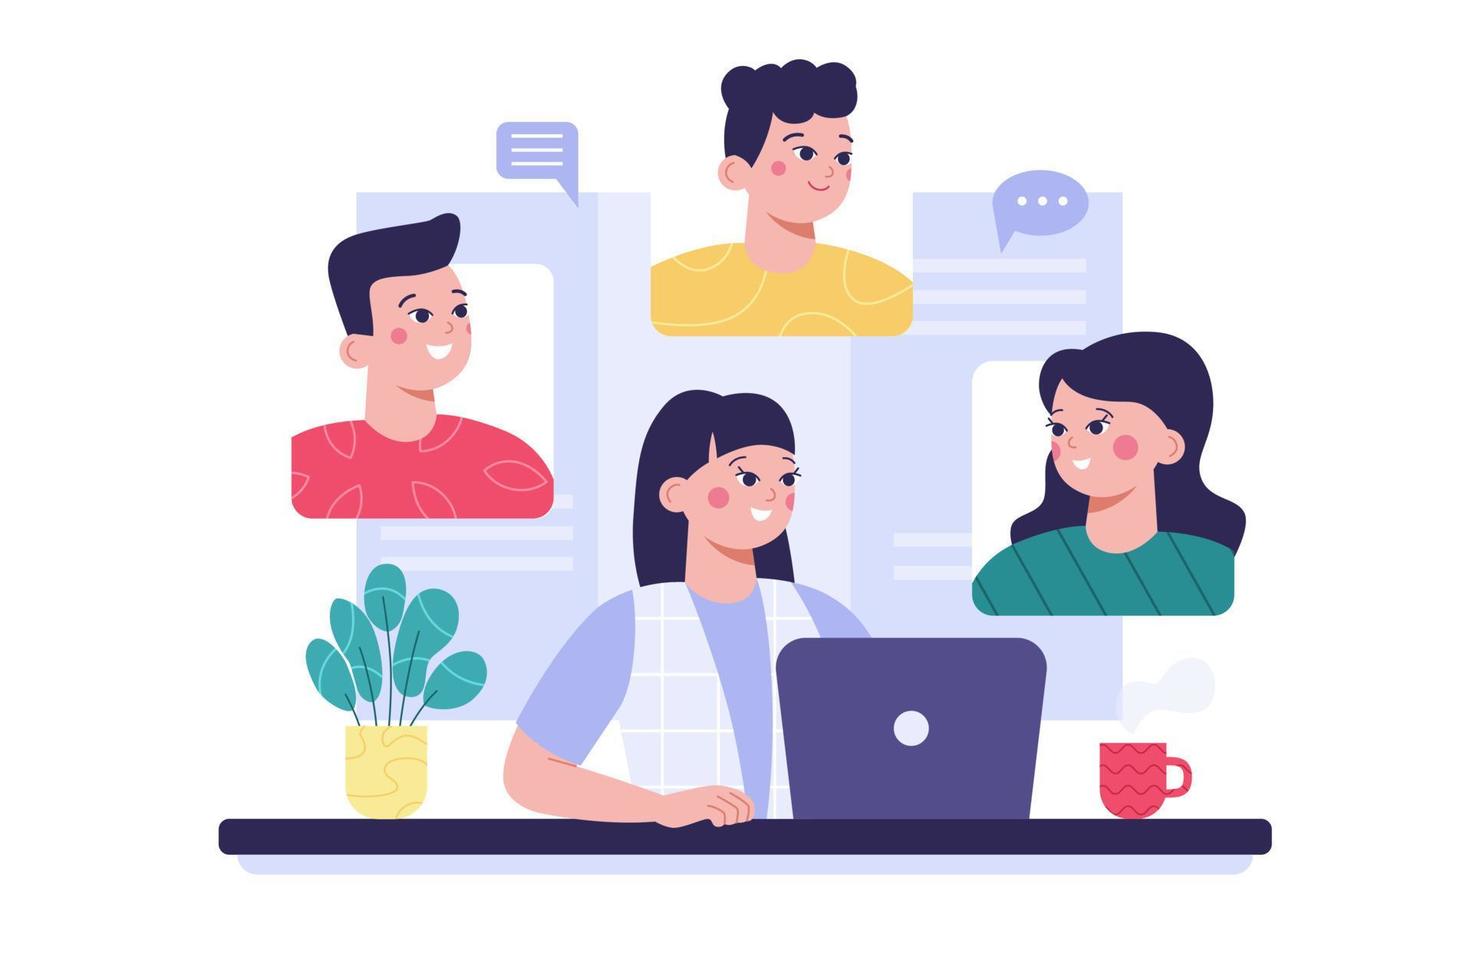 Group of people communicate via video call. Online meeting or conference. Flat vector illustration.